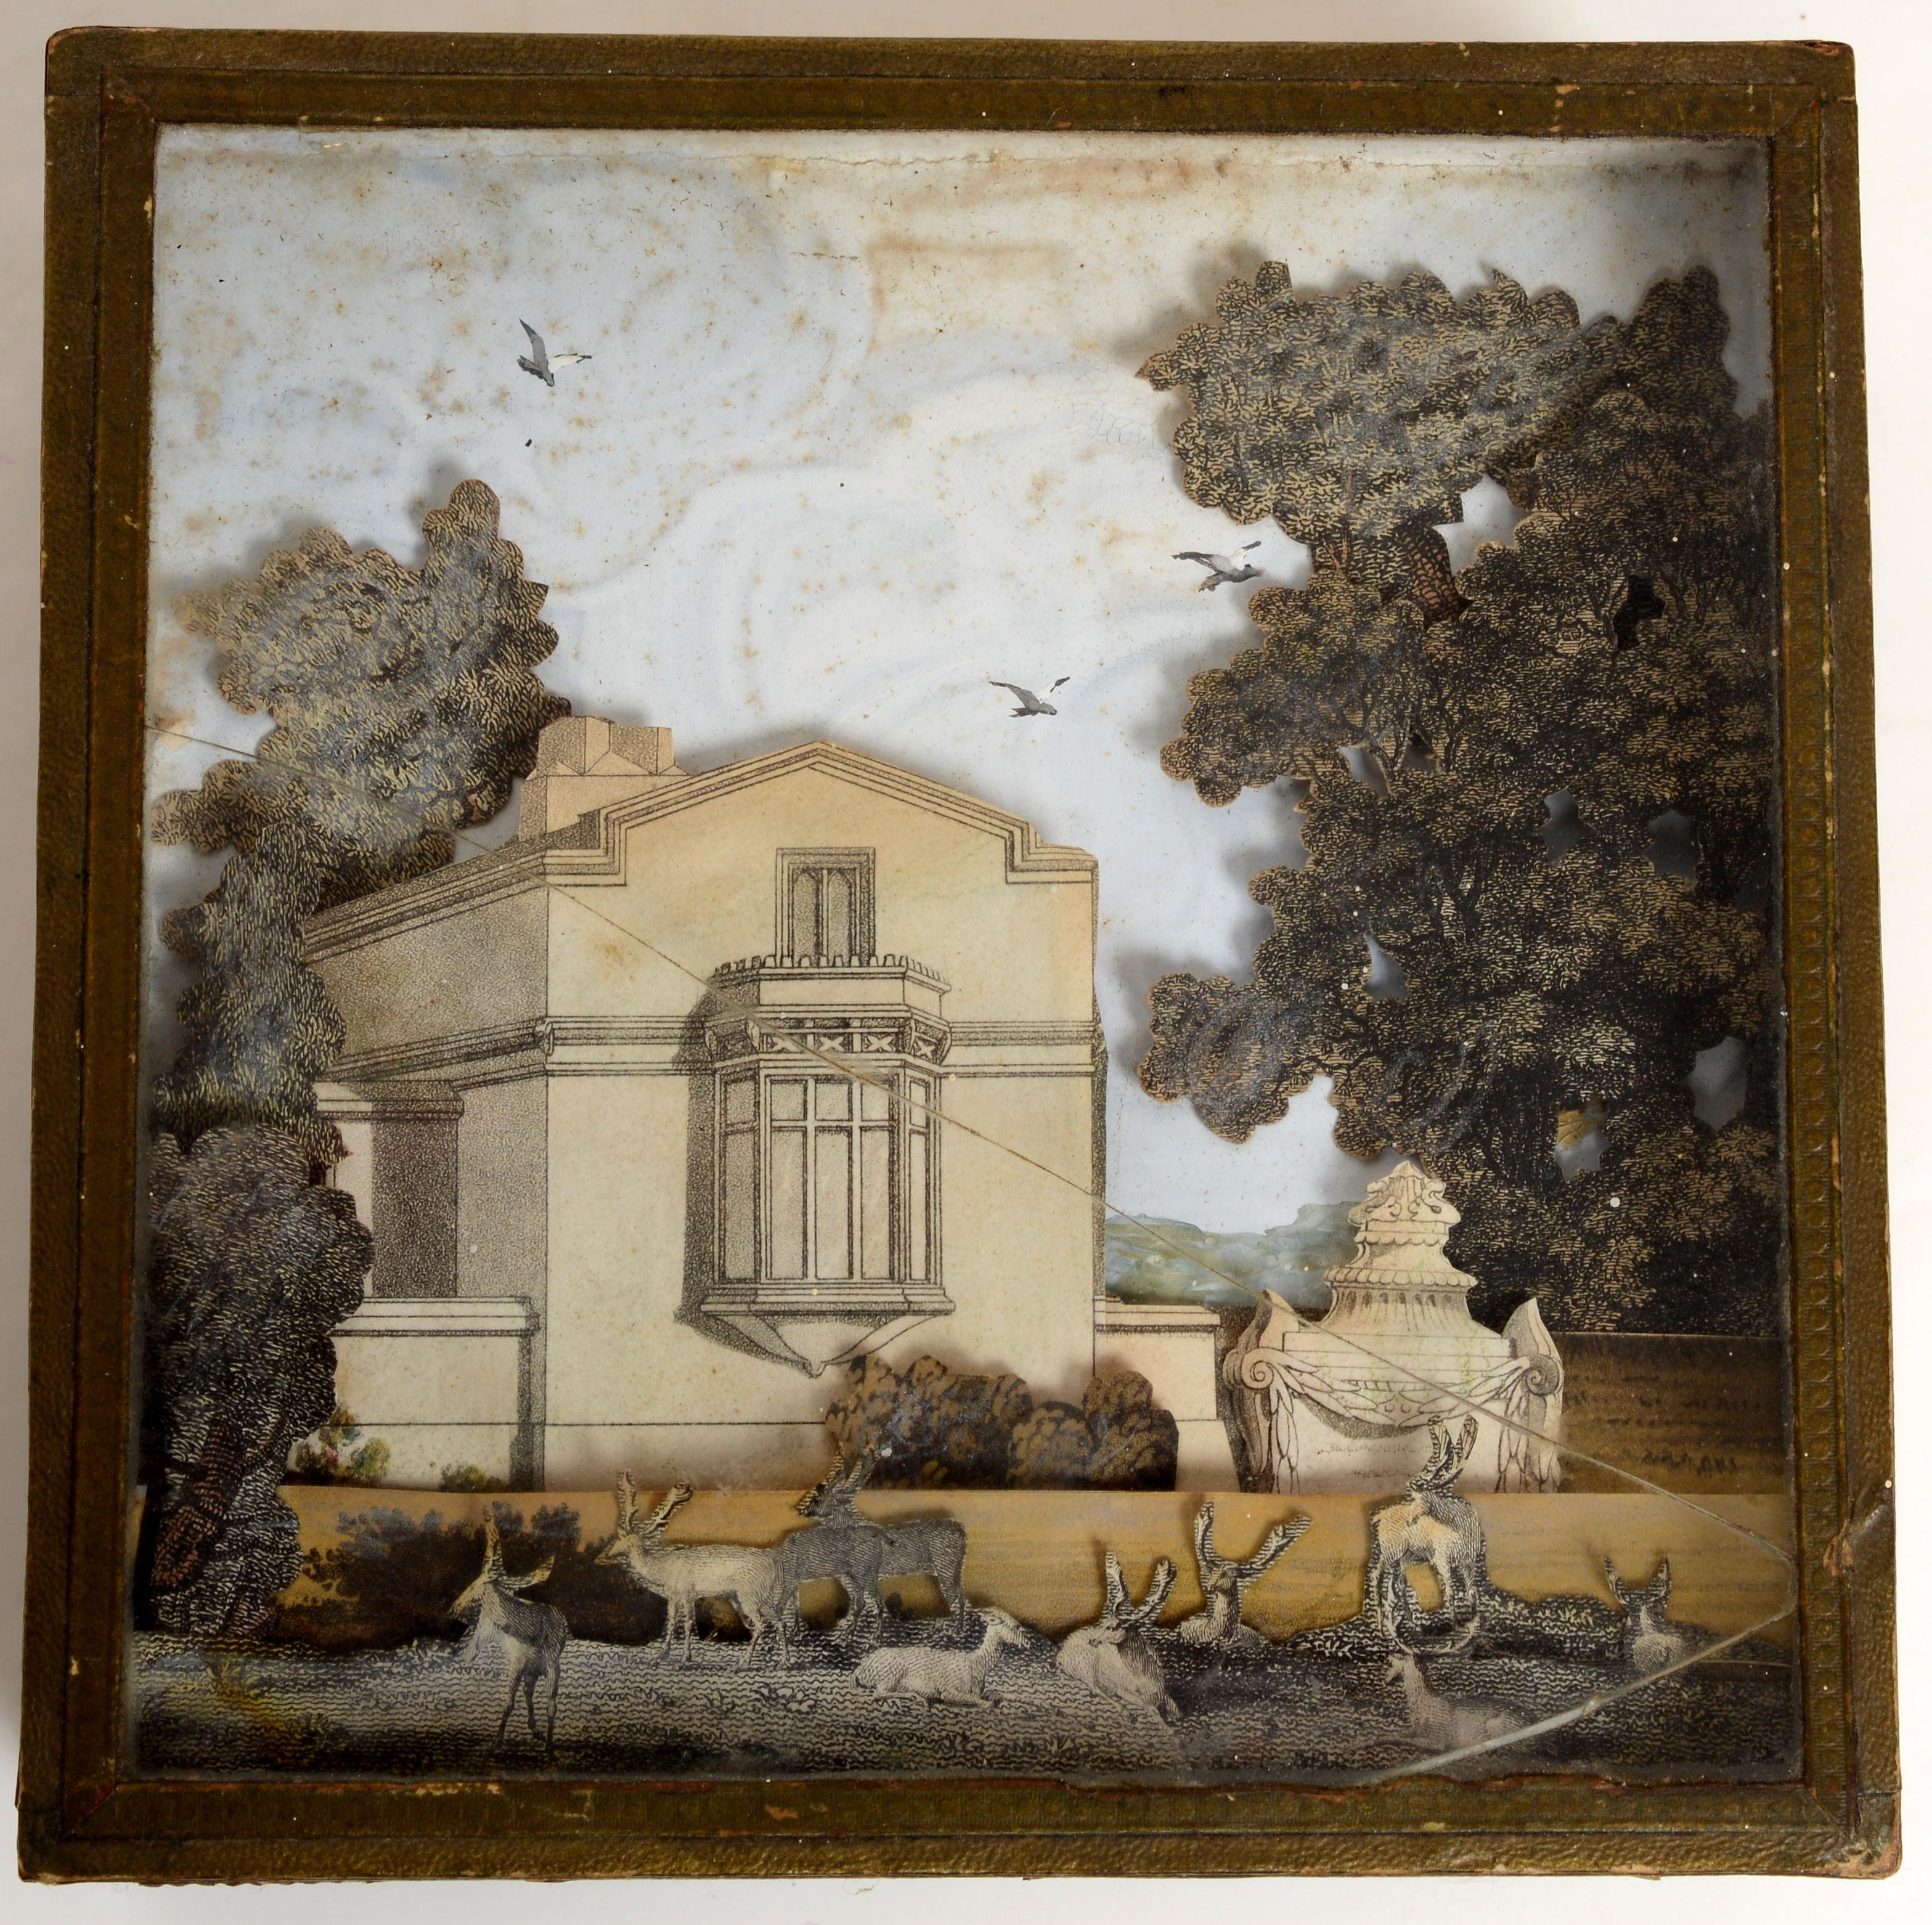 French 19th c Wood and Paper Covered Painted Box With A Neoclassical, Palladian Style, Building Diorama Under the Glass Top. The 3D scene is of a Classical building with wild game in the front, a classical urn and cut out foliage heightened with